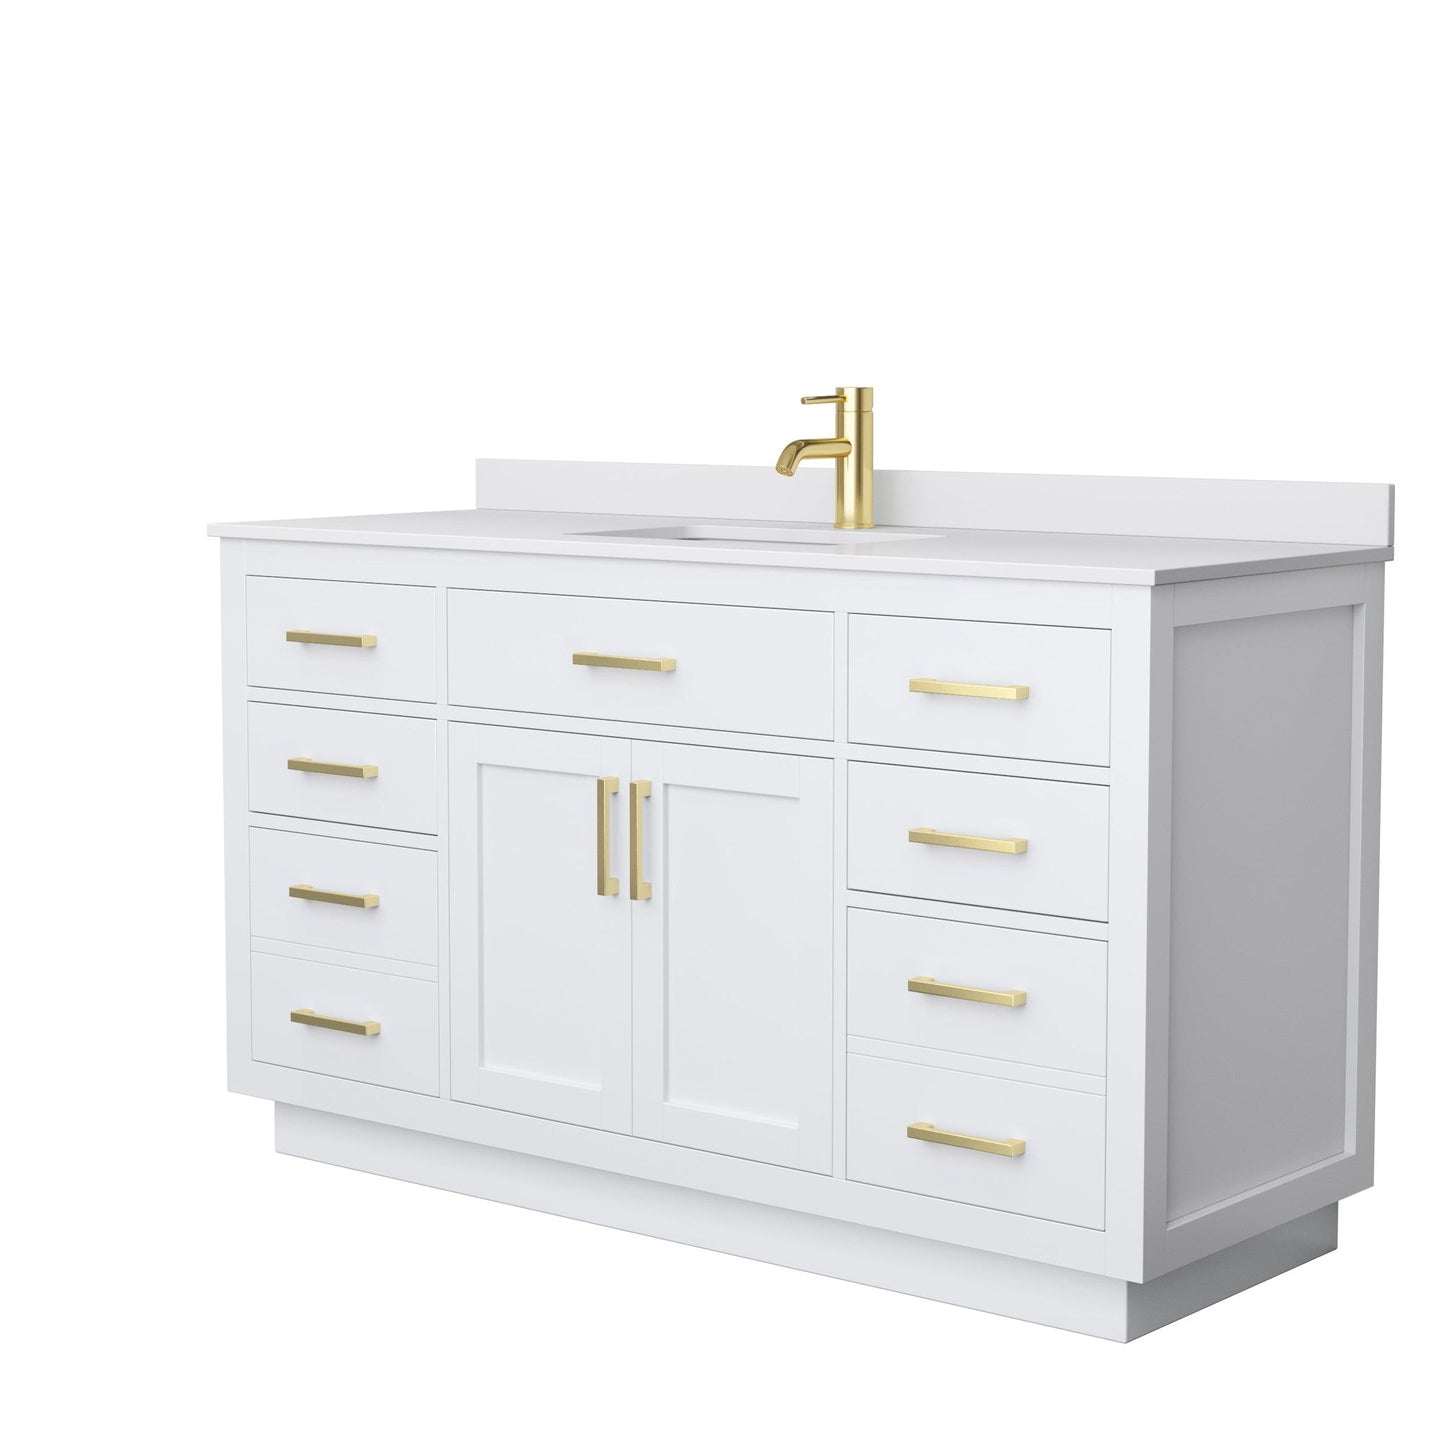 Beckett 60" Single Bathroom Vanity With Toe Kick in White, White Cultured Marble Countertop, Undermount Square Sink, Brushed Gold Trim